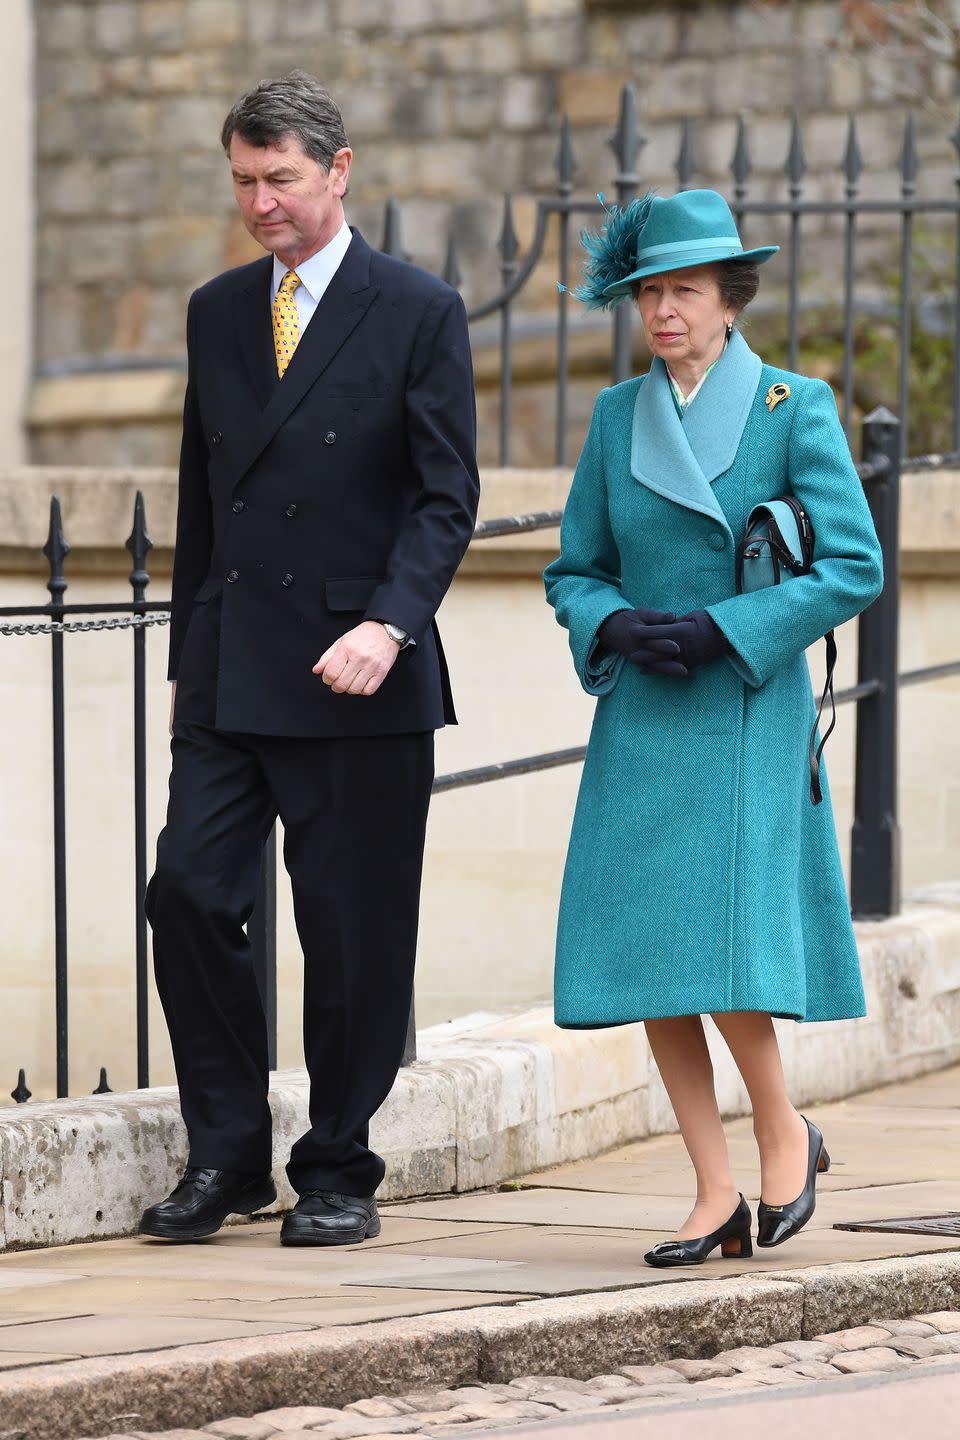 4) Princess Anne and Vice Admiral Sir Timothy Laurence